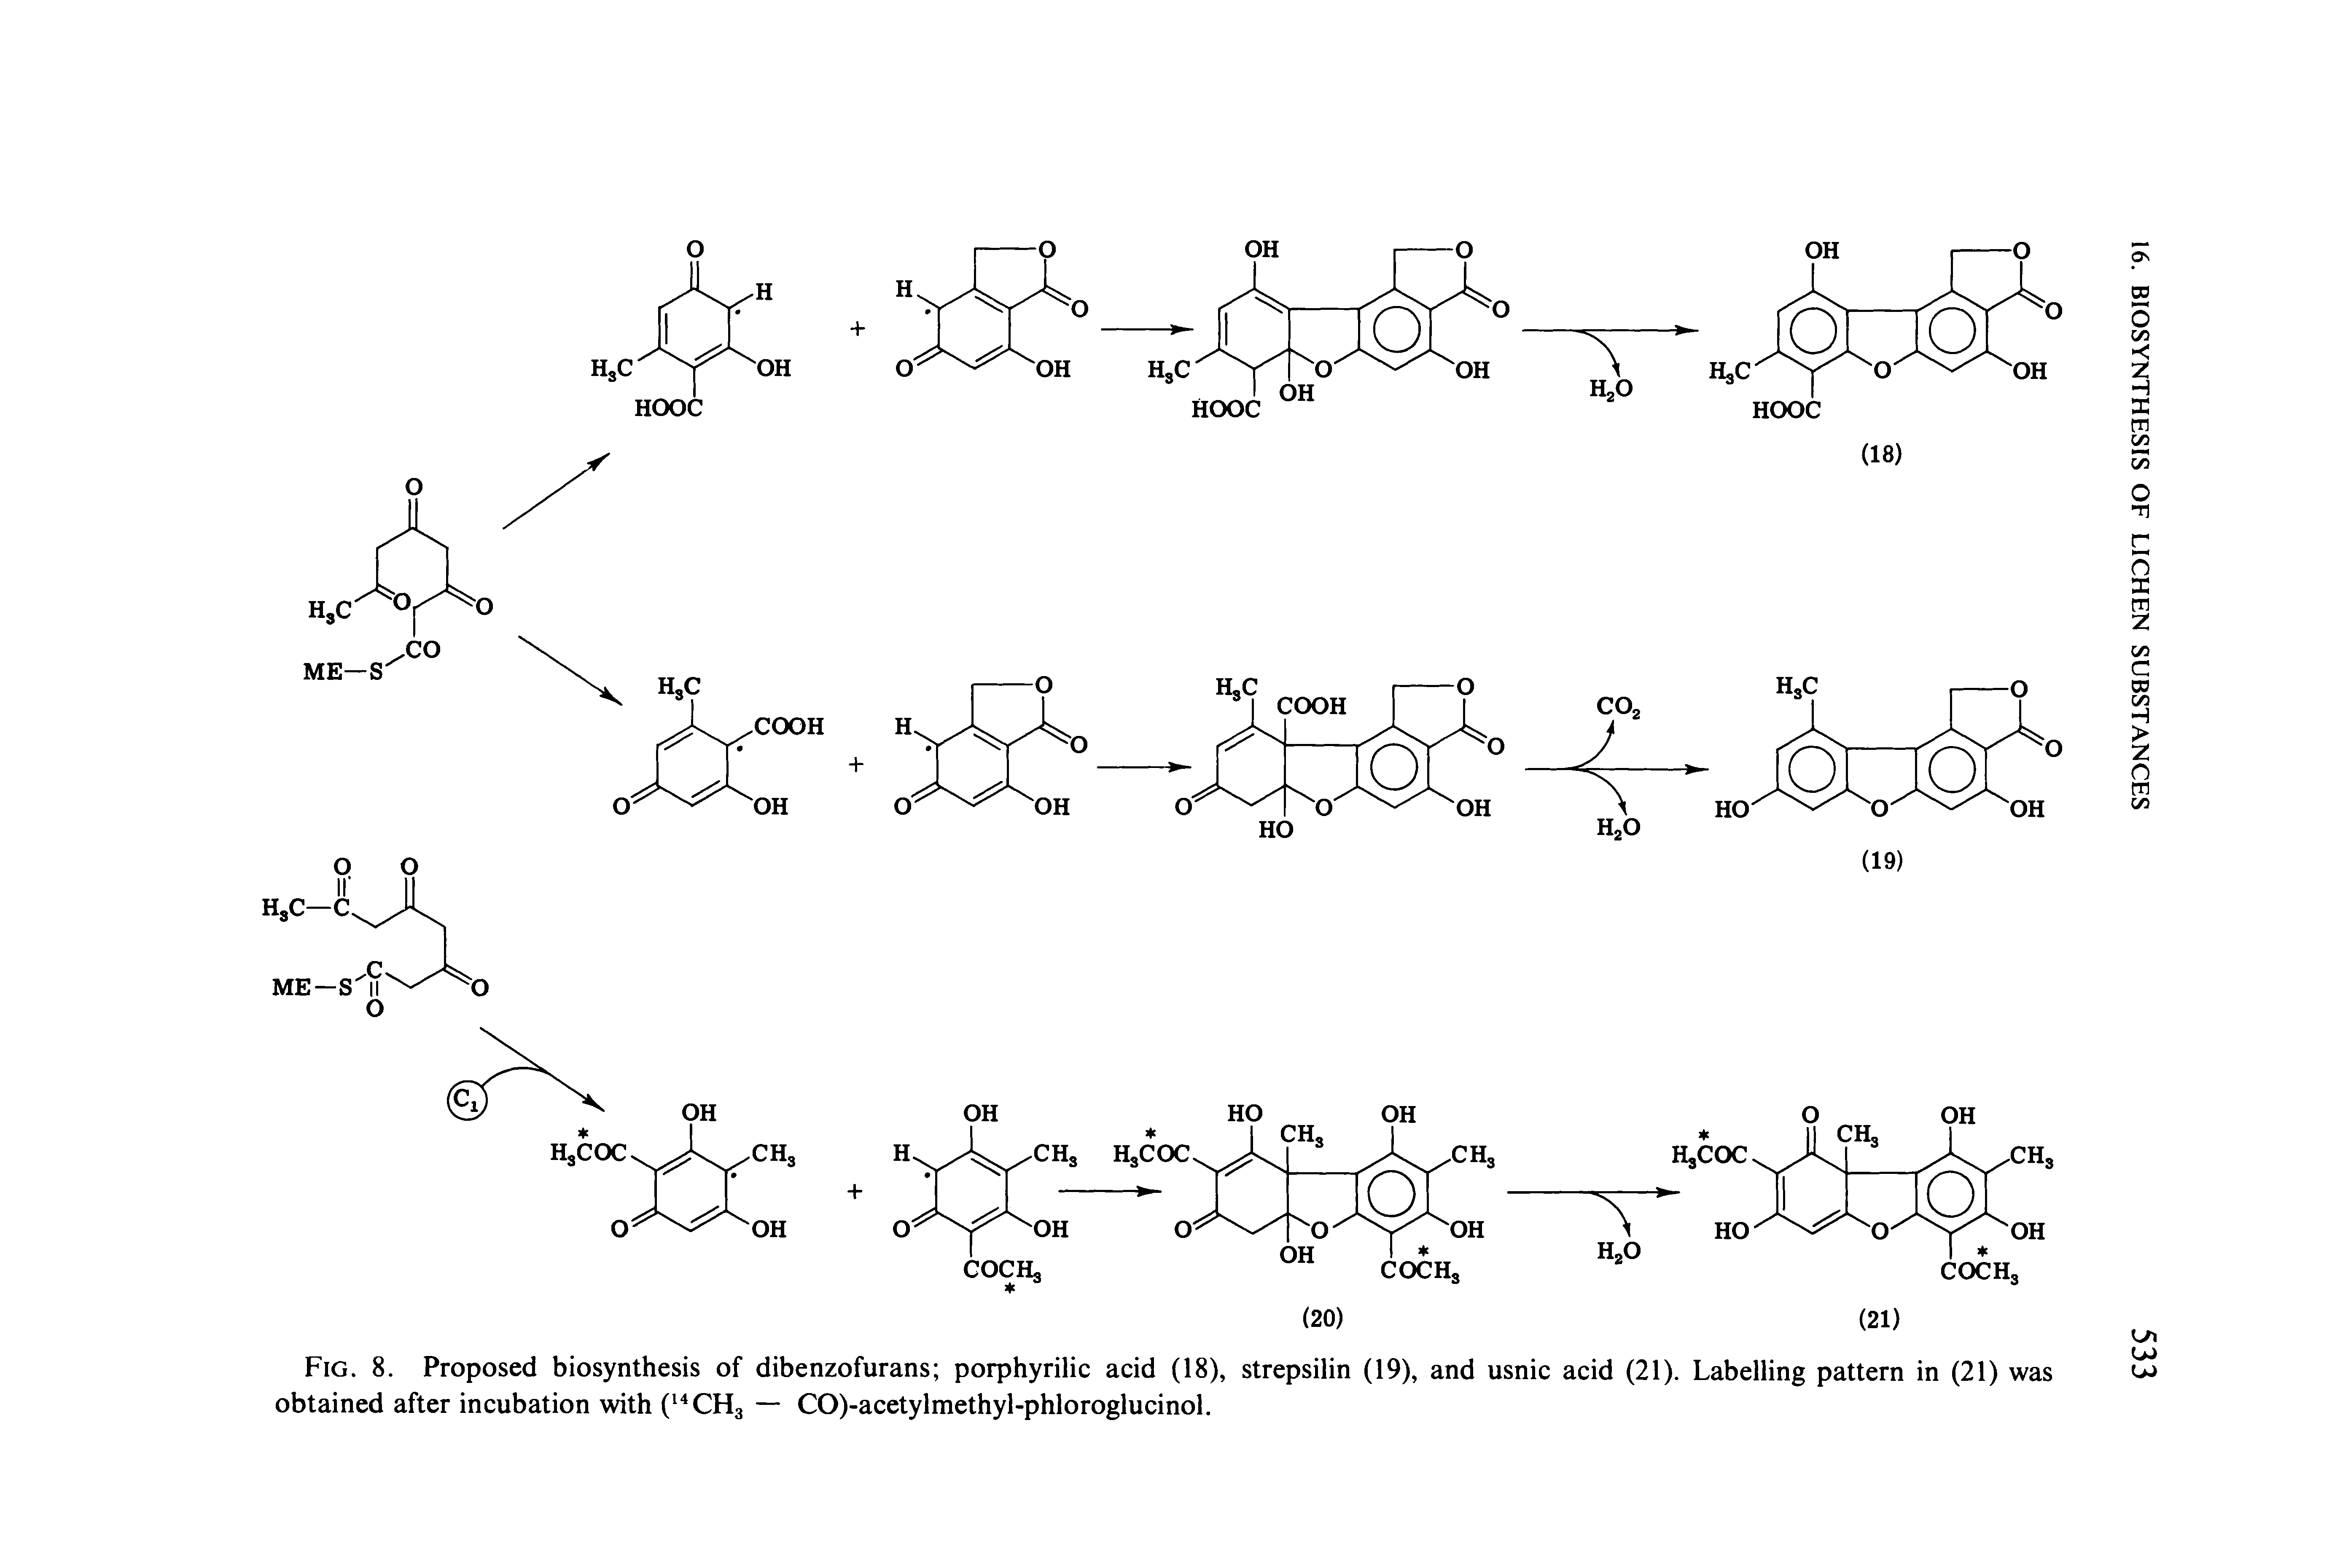 Fig. 8. Proposed biosynthesis of dibenzofurans porphyrilic acid (18), strepsilin (19), and usnic acid (21). Labelling pattern in (21) was obtained after incubation with ( CHg — CO)-acetylmethyl-phloroglucinol.